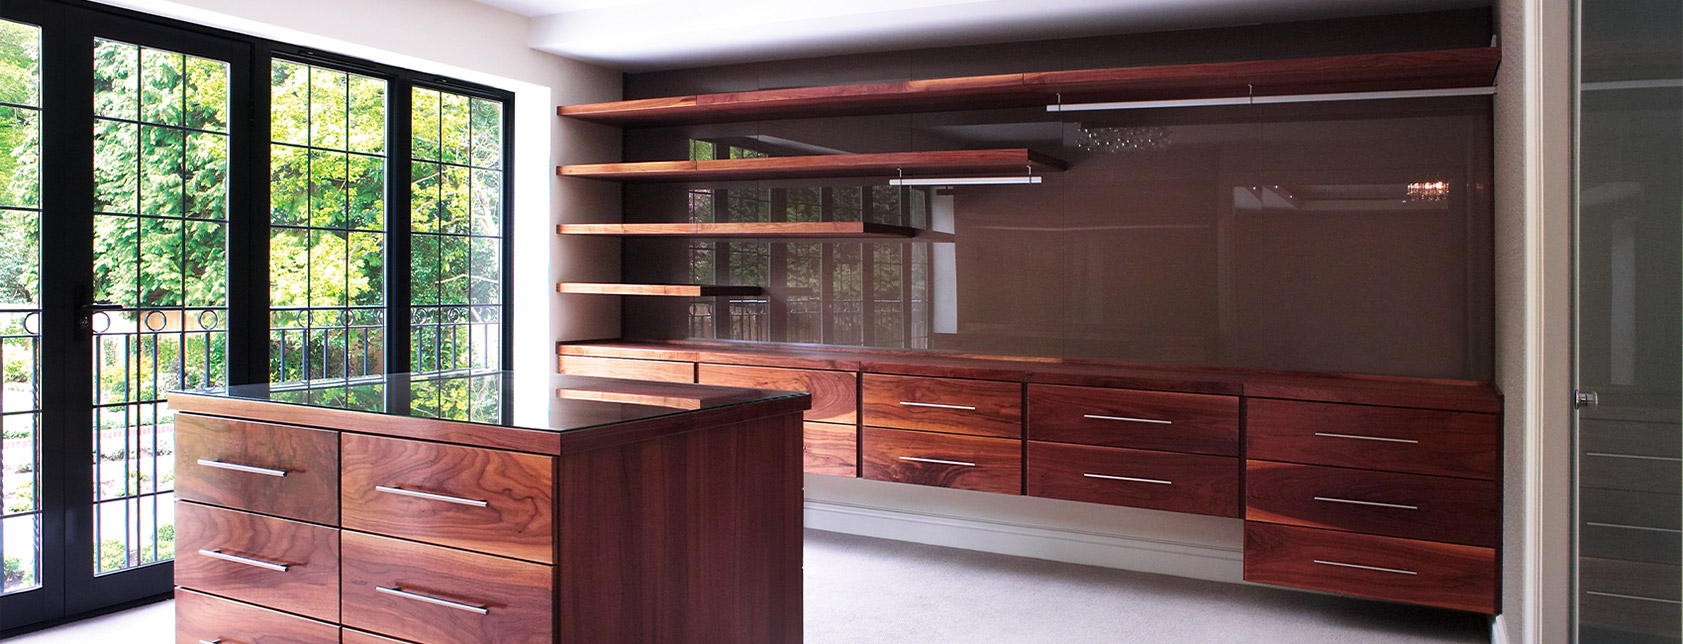 Custom walk-in wardrobes with free-floating drawers and shelves